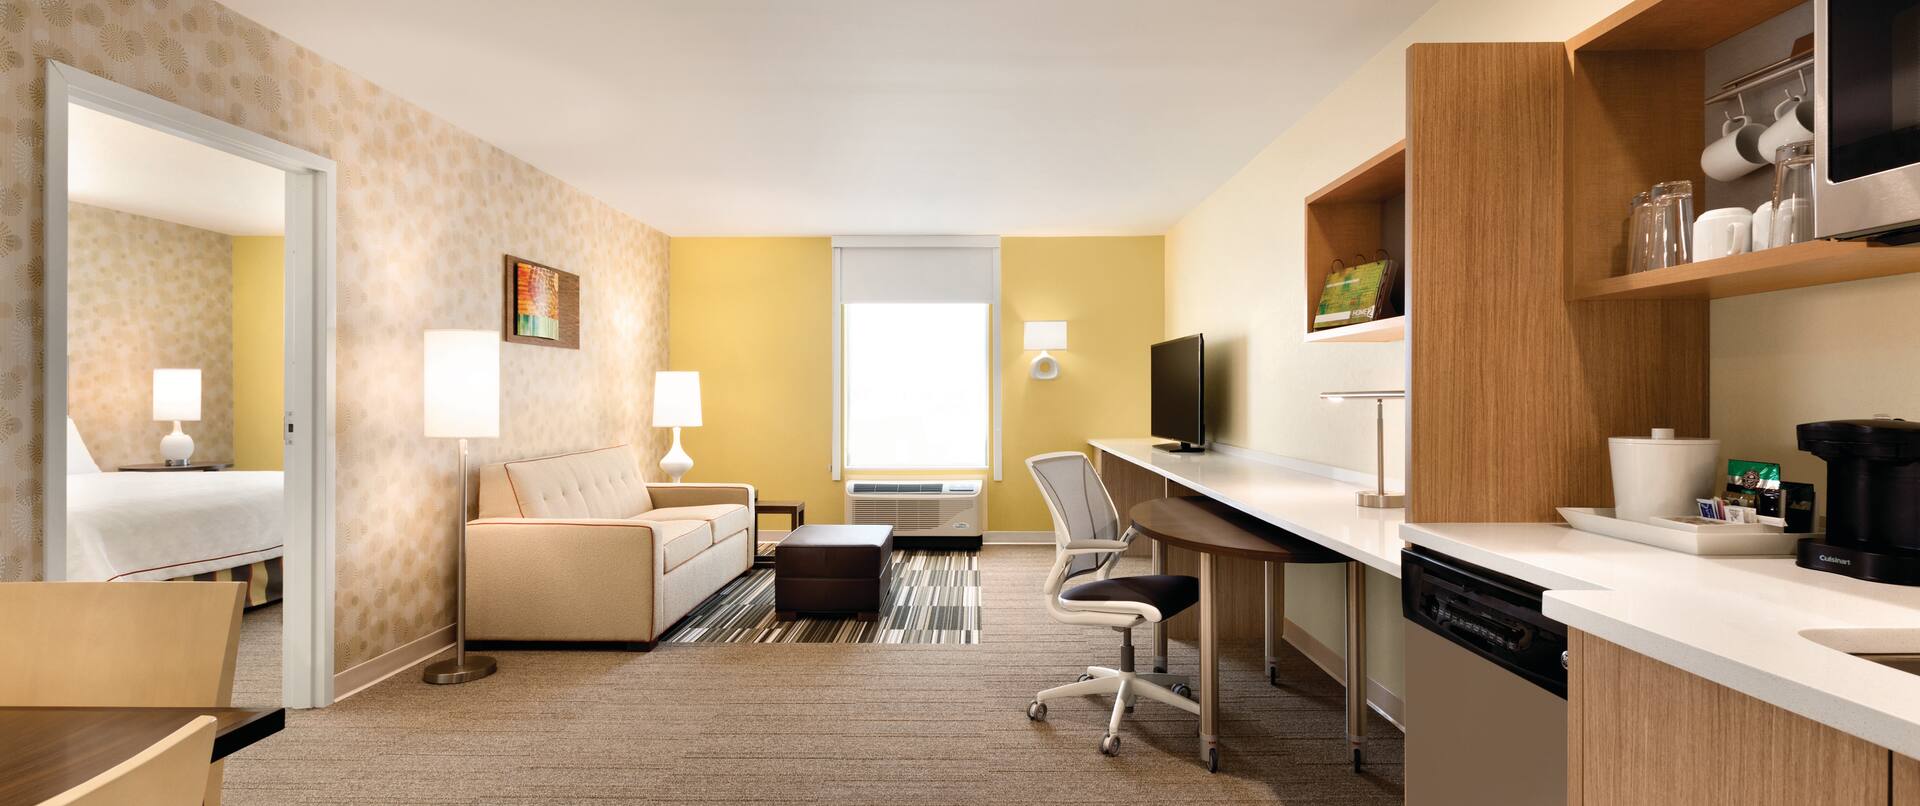 Suite Living Area with Kitchen, Work Desk, Lounge Seating, Television and Entry to Bedroom